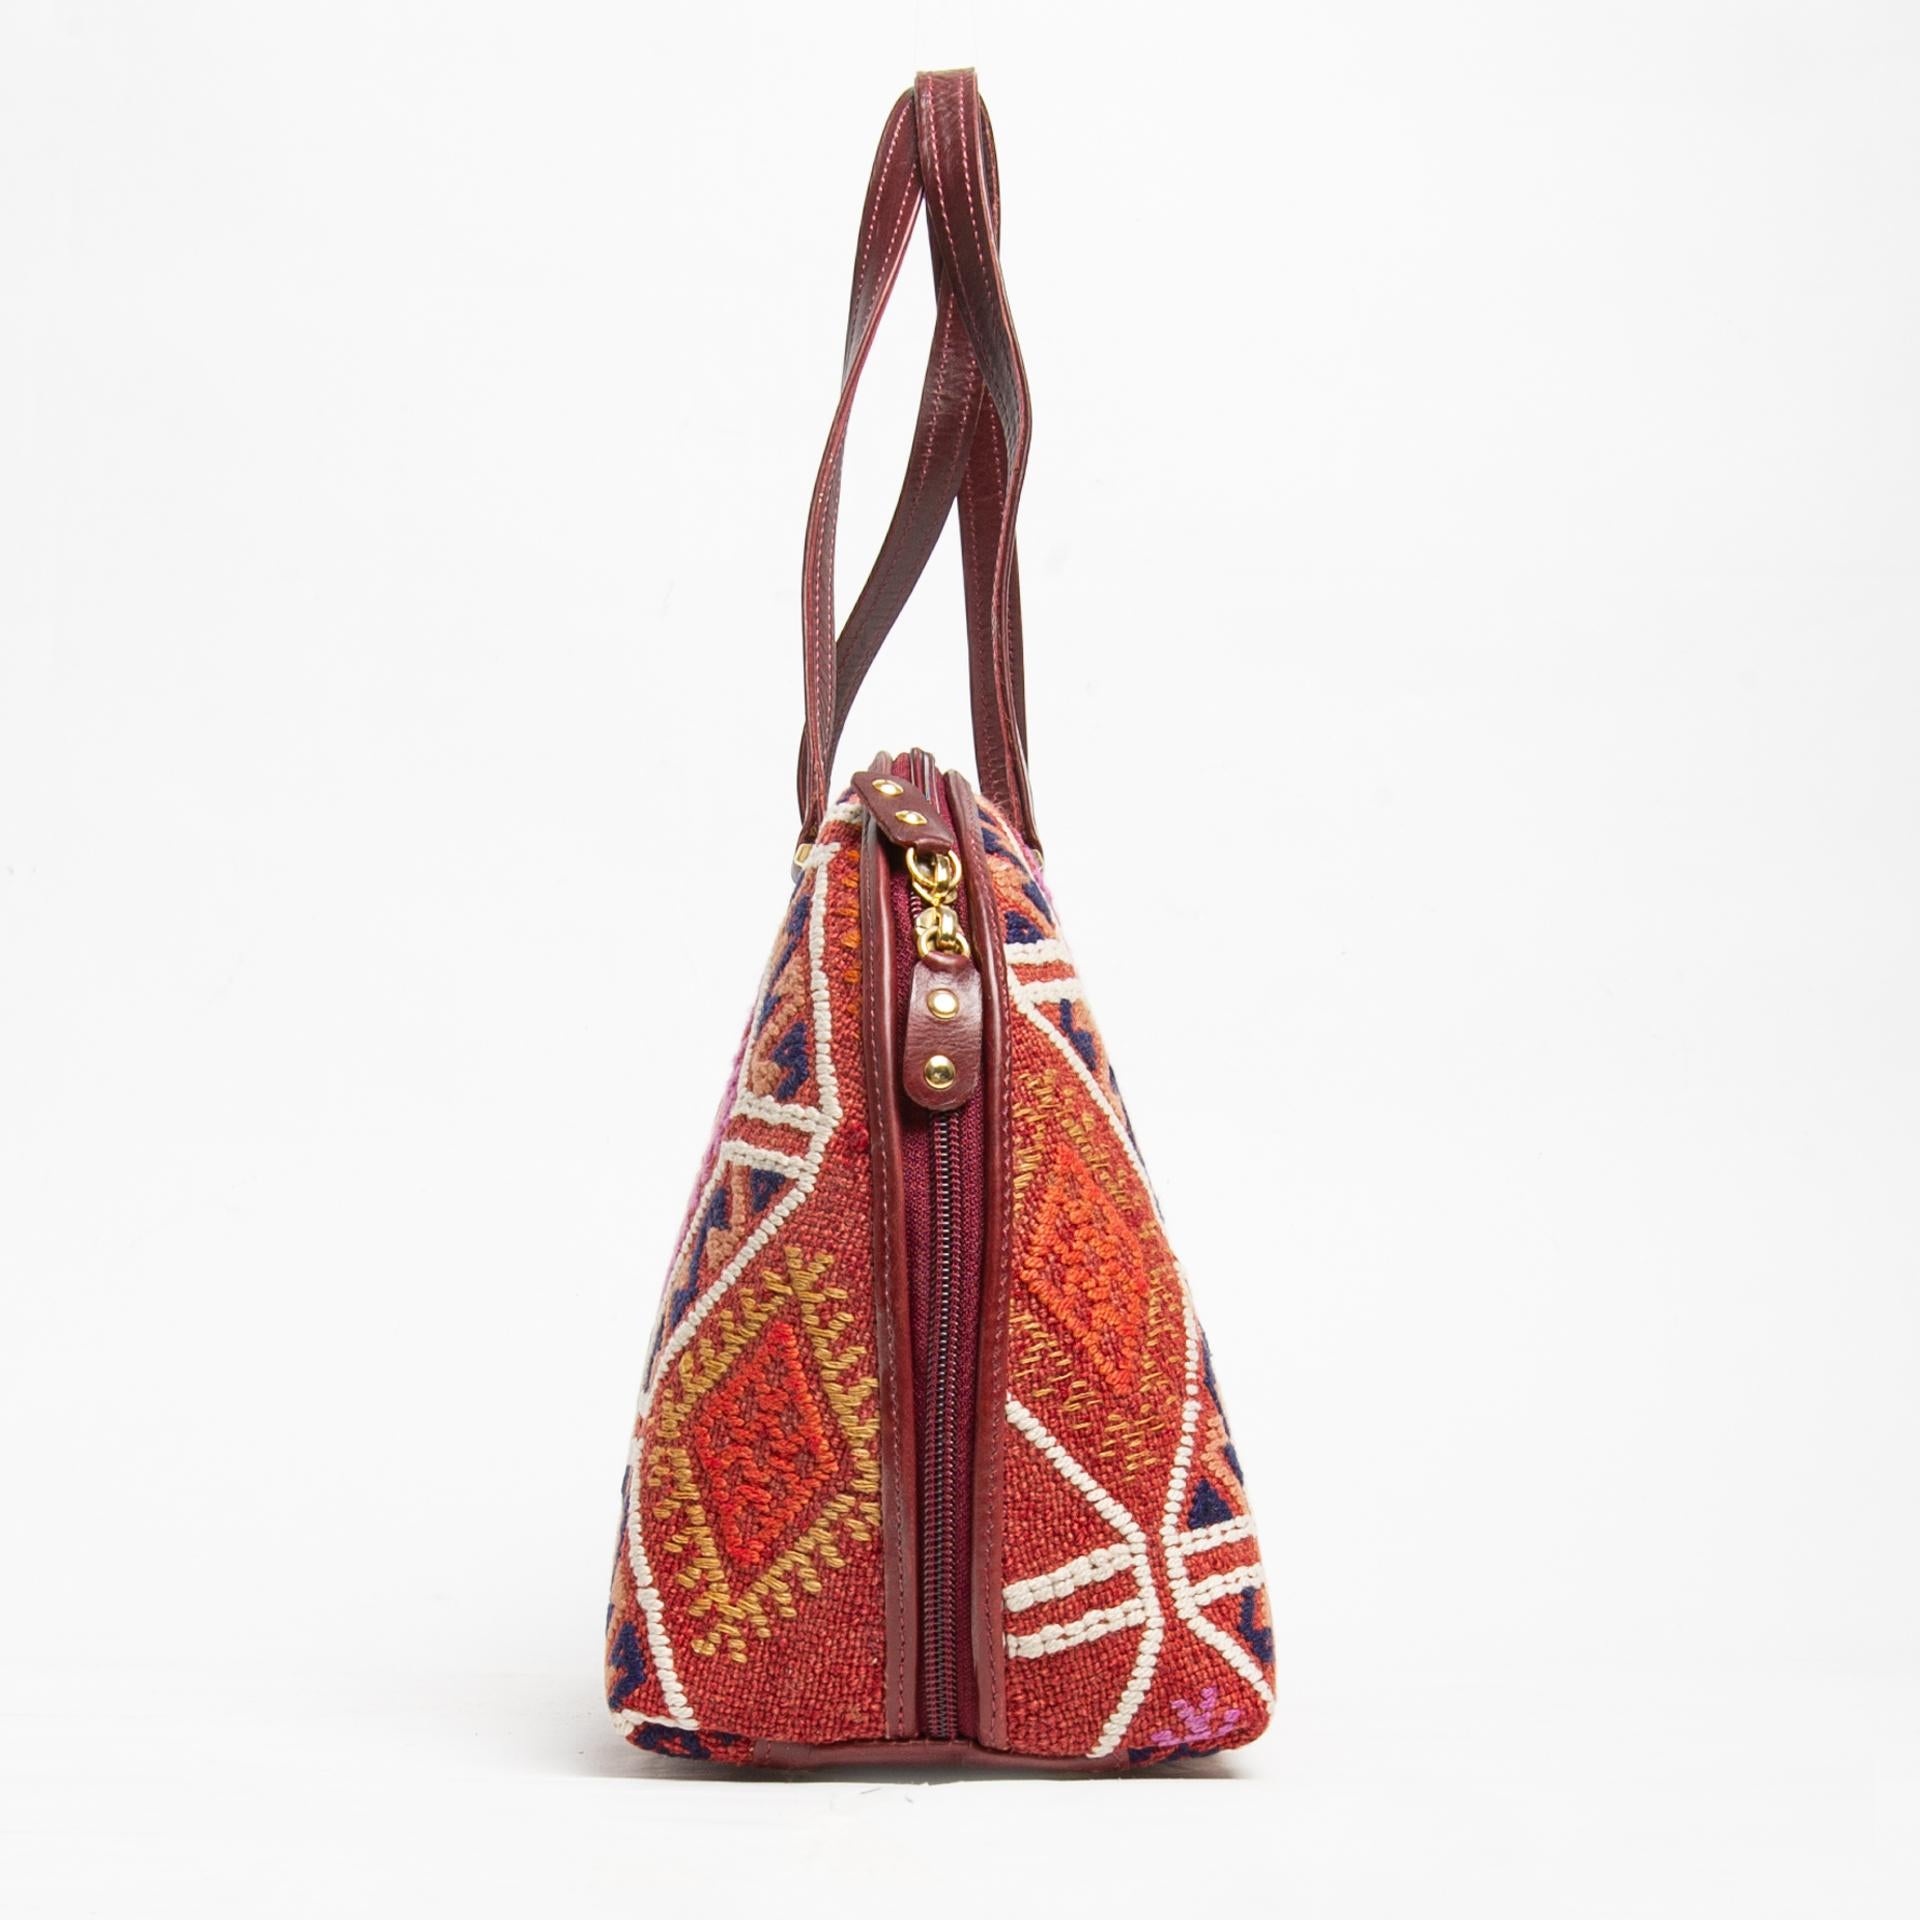 Hand-Woven Italian Bag with Kilim and Leather For Sale